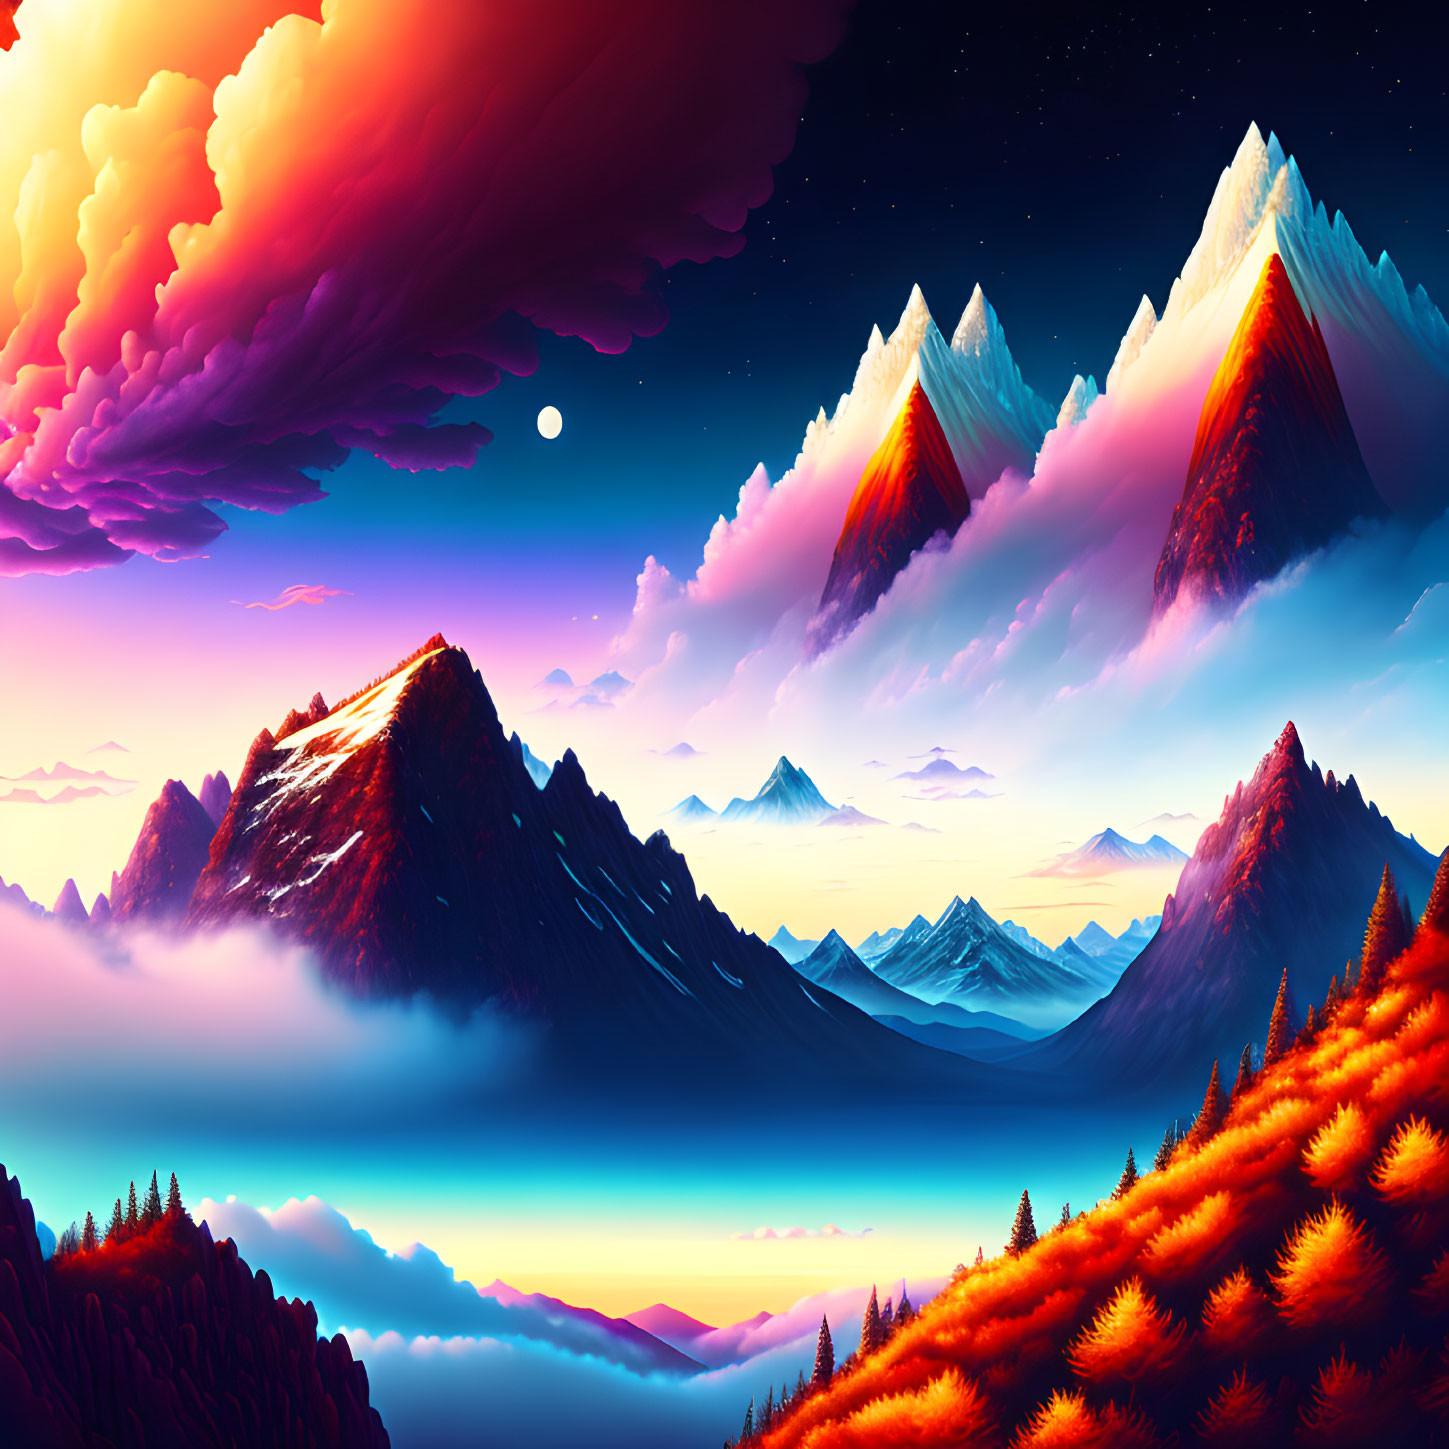 Colorful mountain landscape with misty valleys and full moon